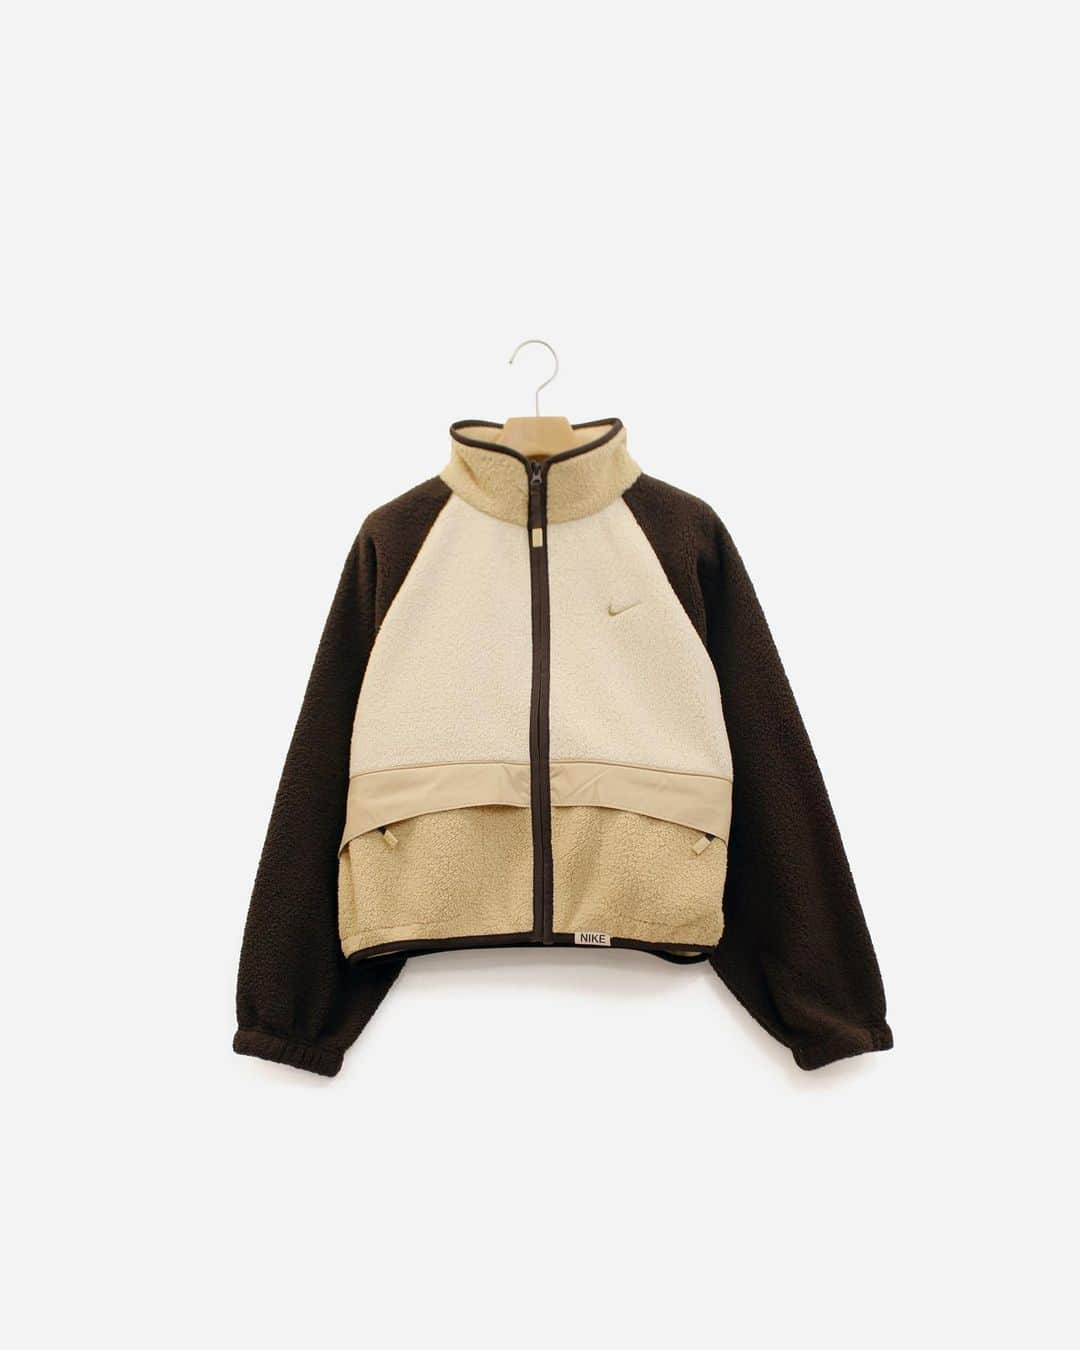 A+Sのインスタグラム：「2021. 2. 1 (mon) in store  ■NIKE WMNS NSW SHERPA CL JACKET COLOR : BAROQUE BROWN SIZE : XS - XL PRICE : ¥12,000 (+TAX)  お気に入りのカフェで一息。 カフェカルチャーの雰囲気にインスパイアされたジャケット。豊かで温かみのあるお気に入りのラテがベースカラーになっています。非常に柔らかく羊毛のようなシェルパ生地で作られ、冷えきった体を温め快適に過ごせます。ゆったりとしたフィット感で簡単に重ね着でき、のんびりとした一時を引き立てる一着に仕上がっています。  Take a break at your favorite cafe. A jacket inspired by the atmosphere of cafe culture. The rich and warm favorite latte is the base color. Made from a very soft, wool-like Sherpa fabric, it keeps your cold body warm and comfortable. It has a loose fit and can be easily layered, making it a perfect companion for a relaxing moment.   #a_and_s #NIKE #NIKESOPRTSWEAR #NIKECAFFELATTEPACK」